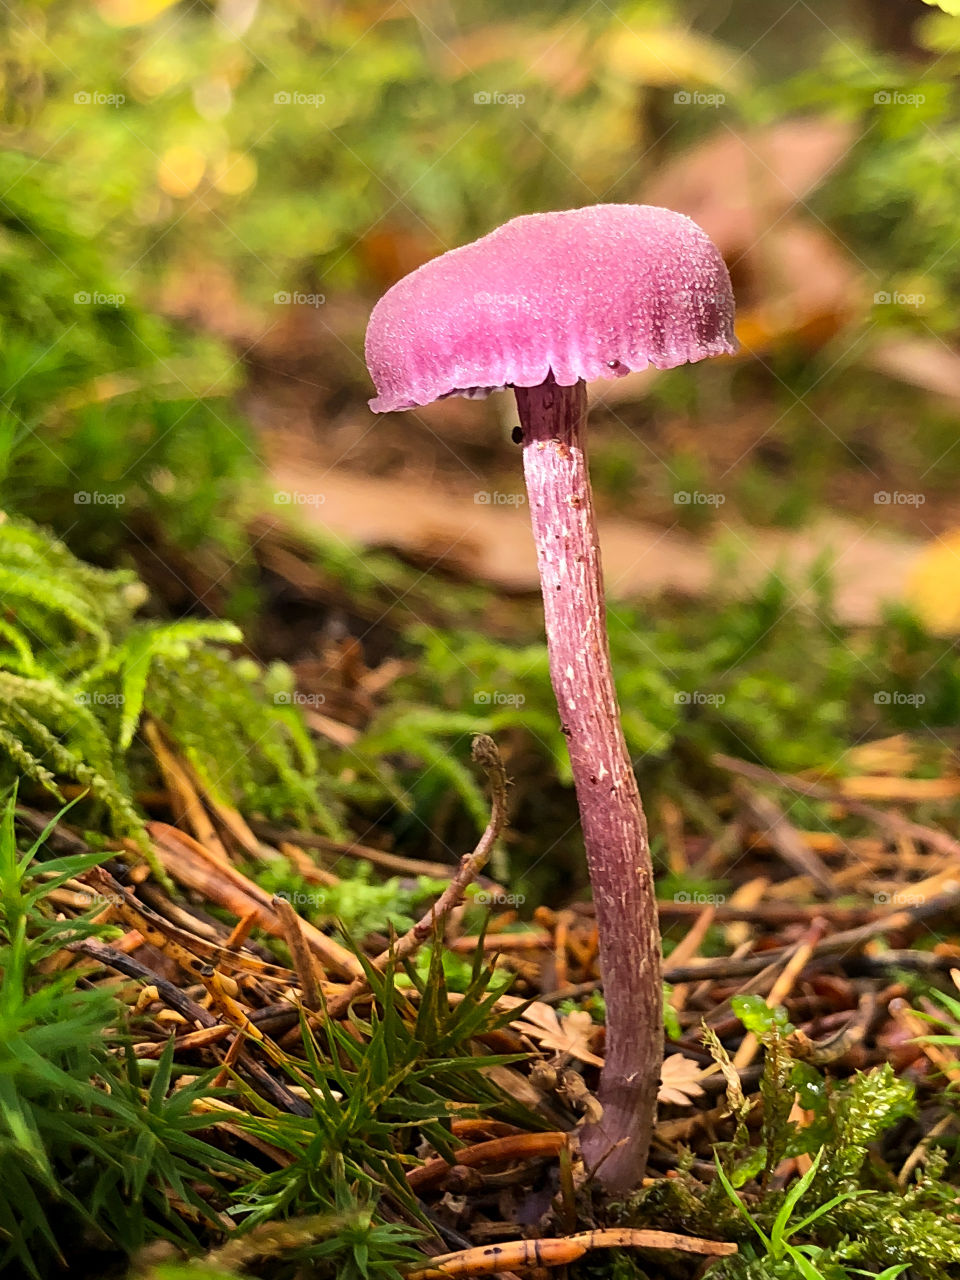 On the forest floor